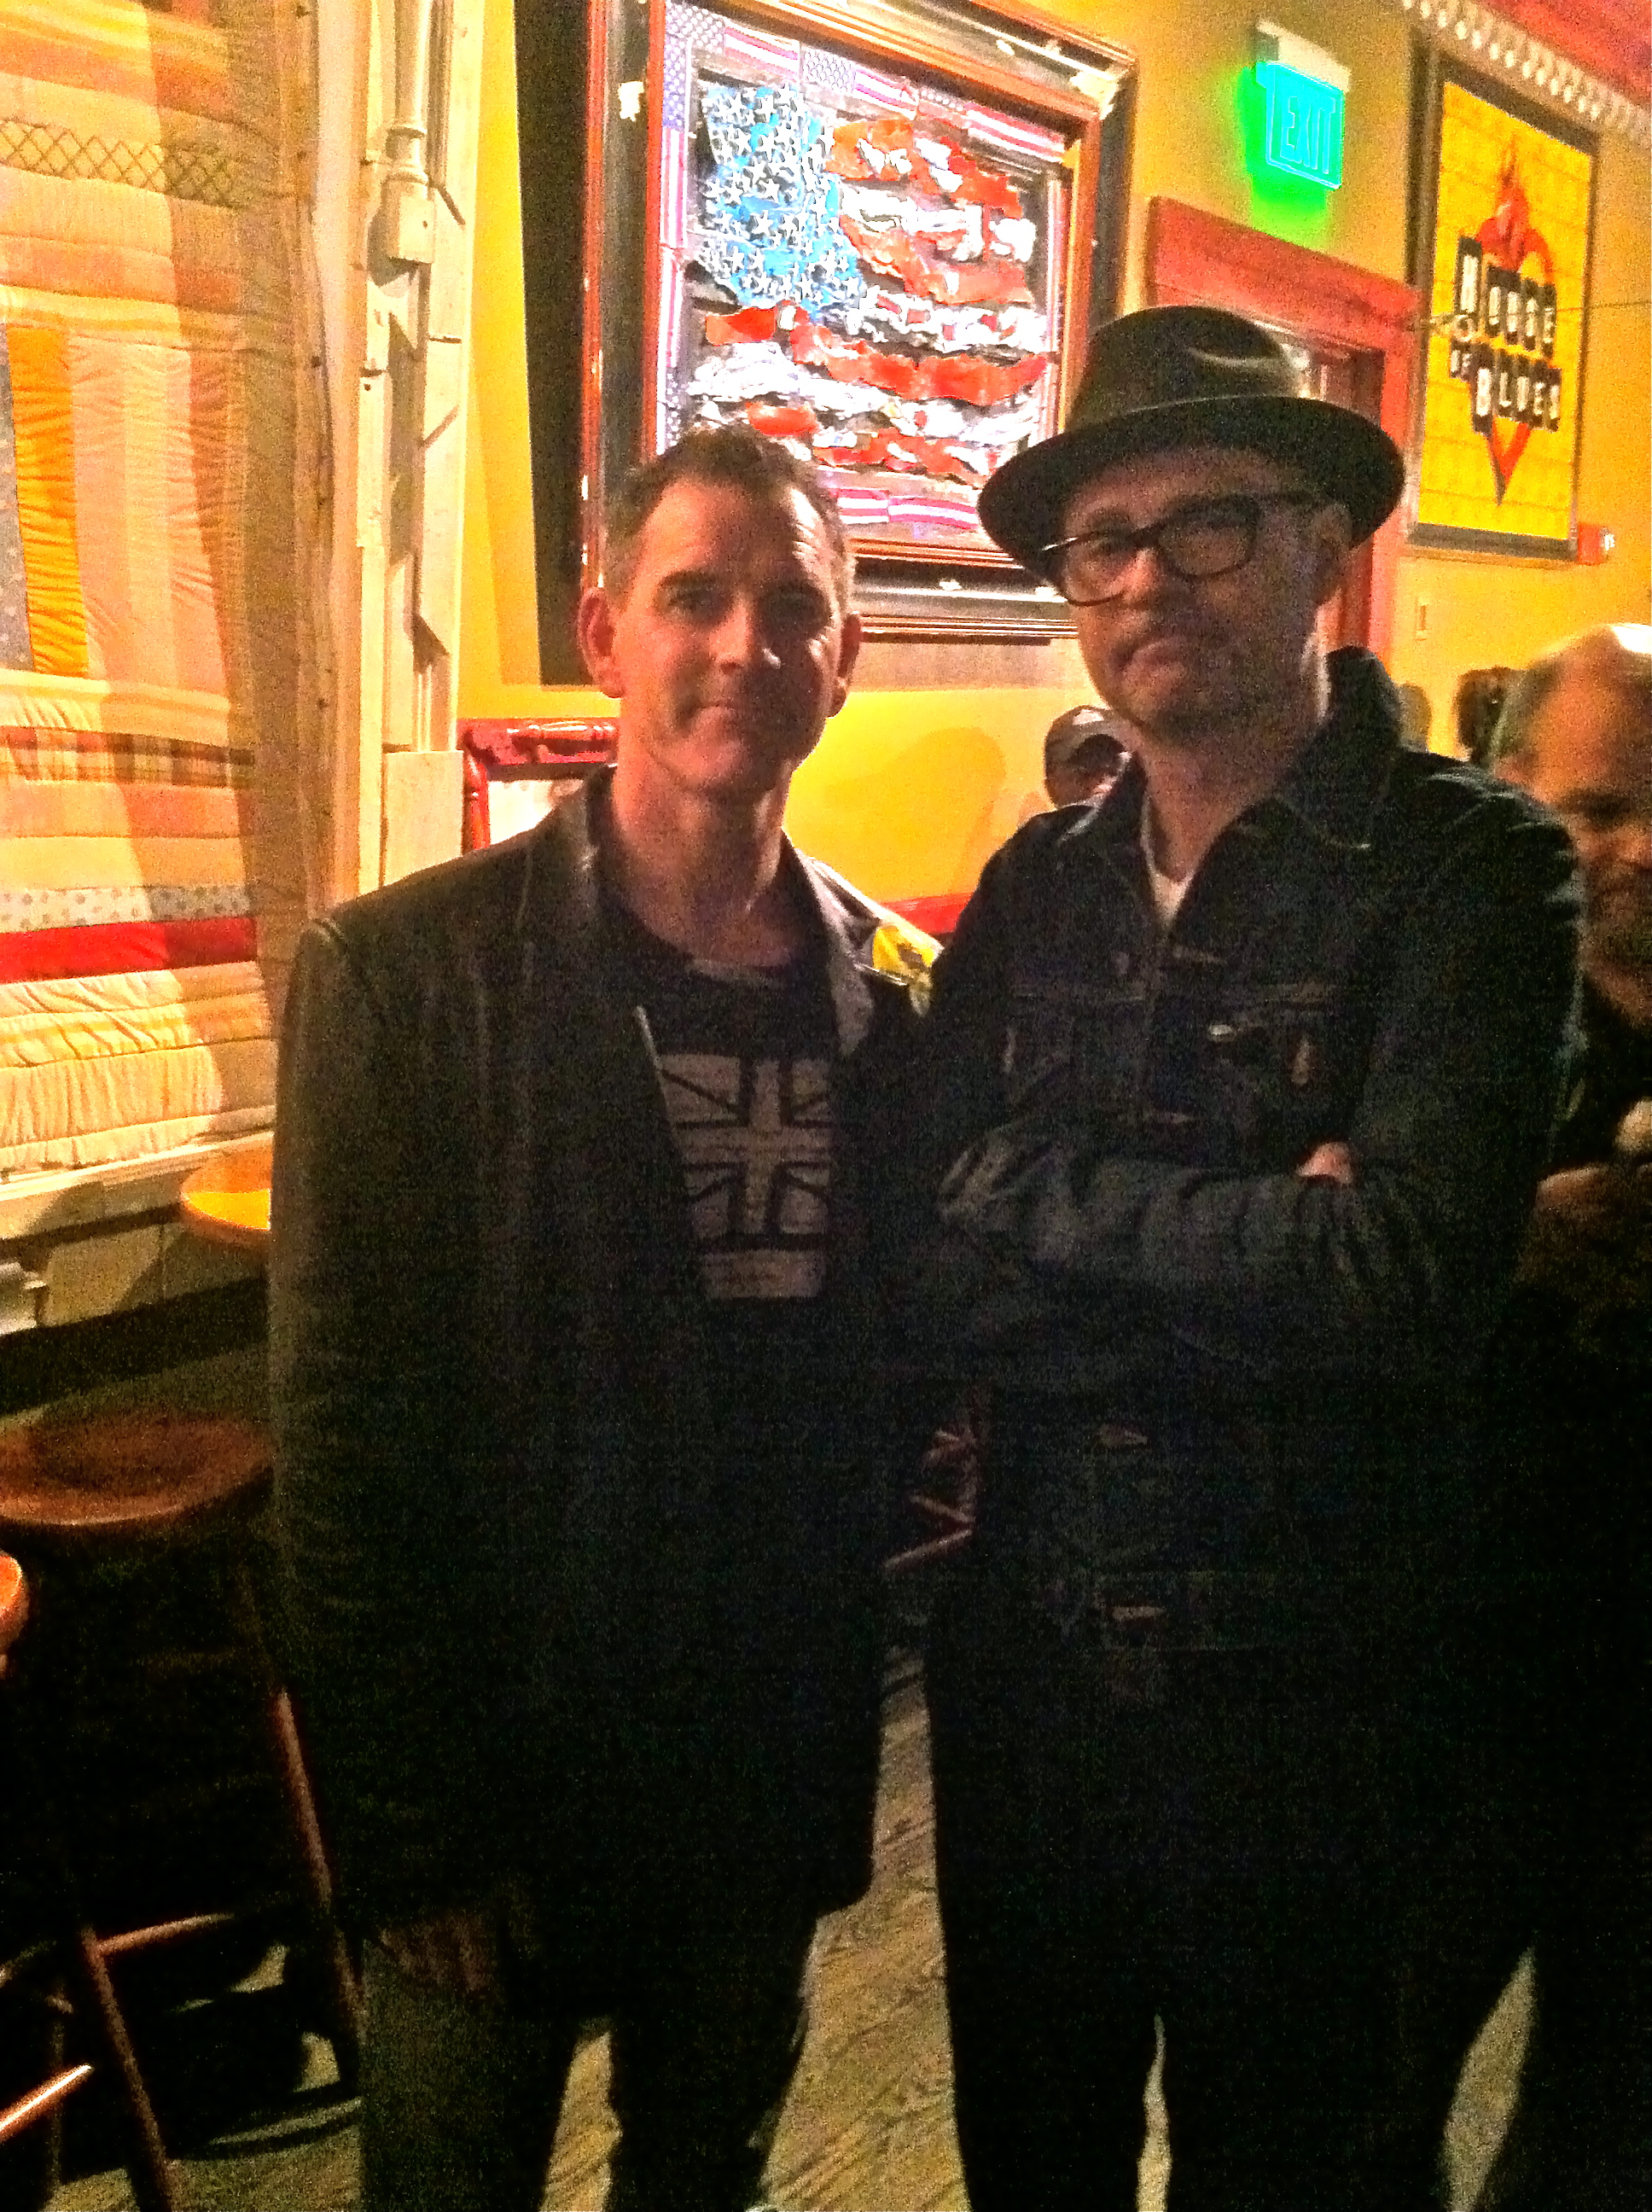 Two Canadians in Anaheim .... Gord Downie after a rect Hip show.